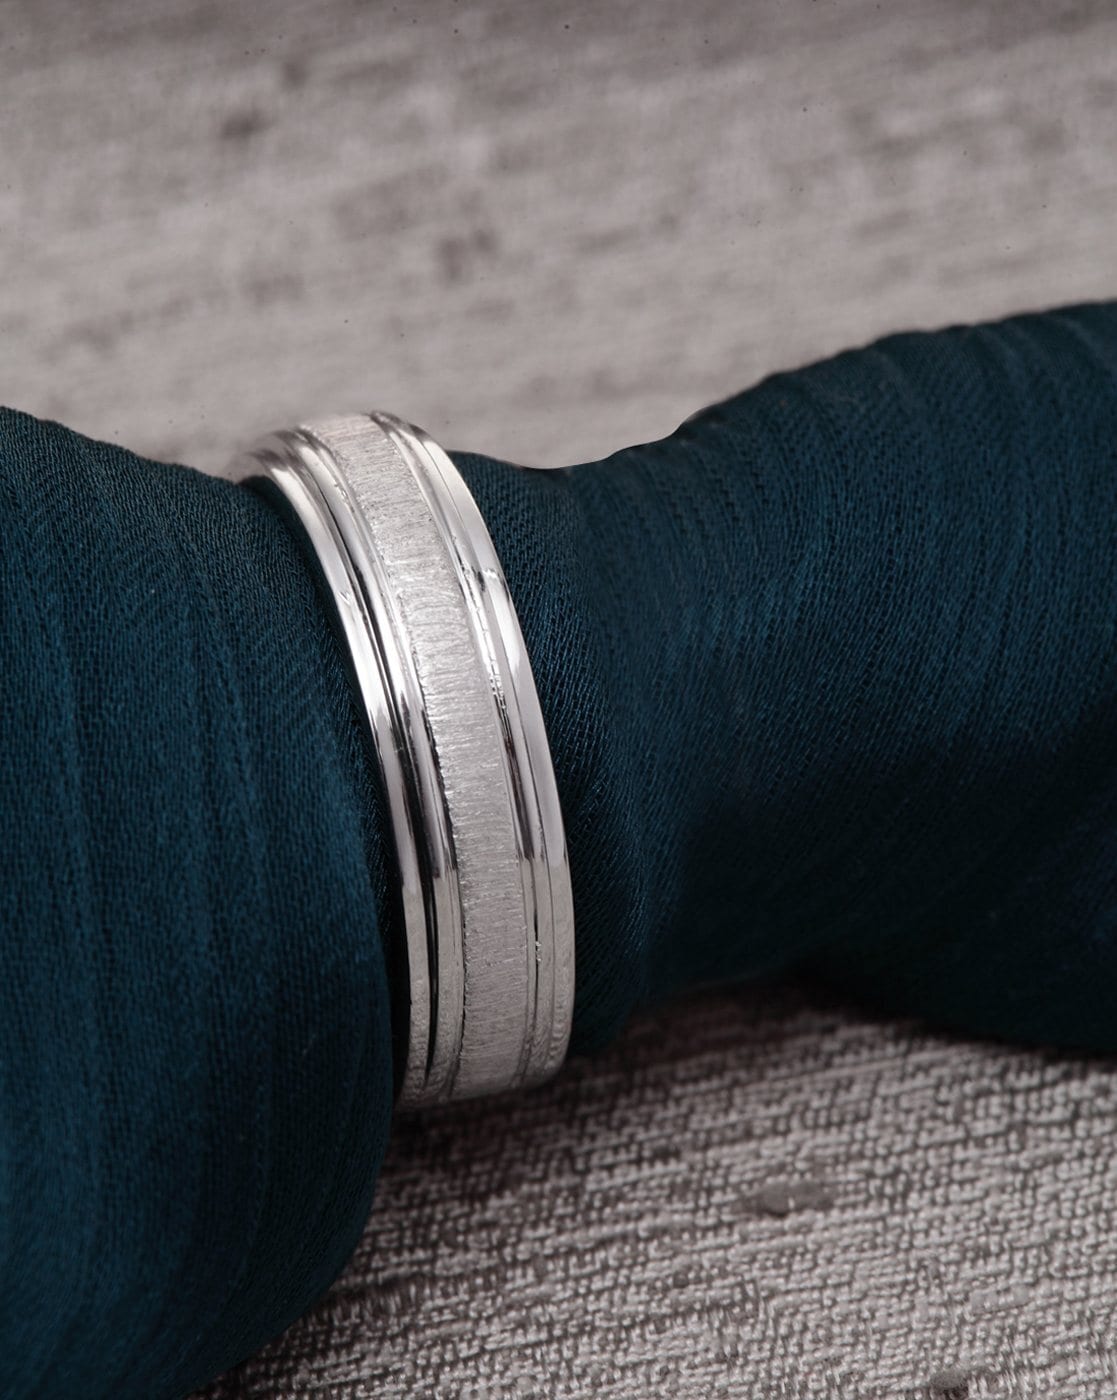 How To Wear Men's Rings To Accessorize Any Outfit In Style - Blog |  Montelongo's Fine Jewelry